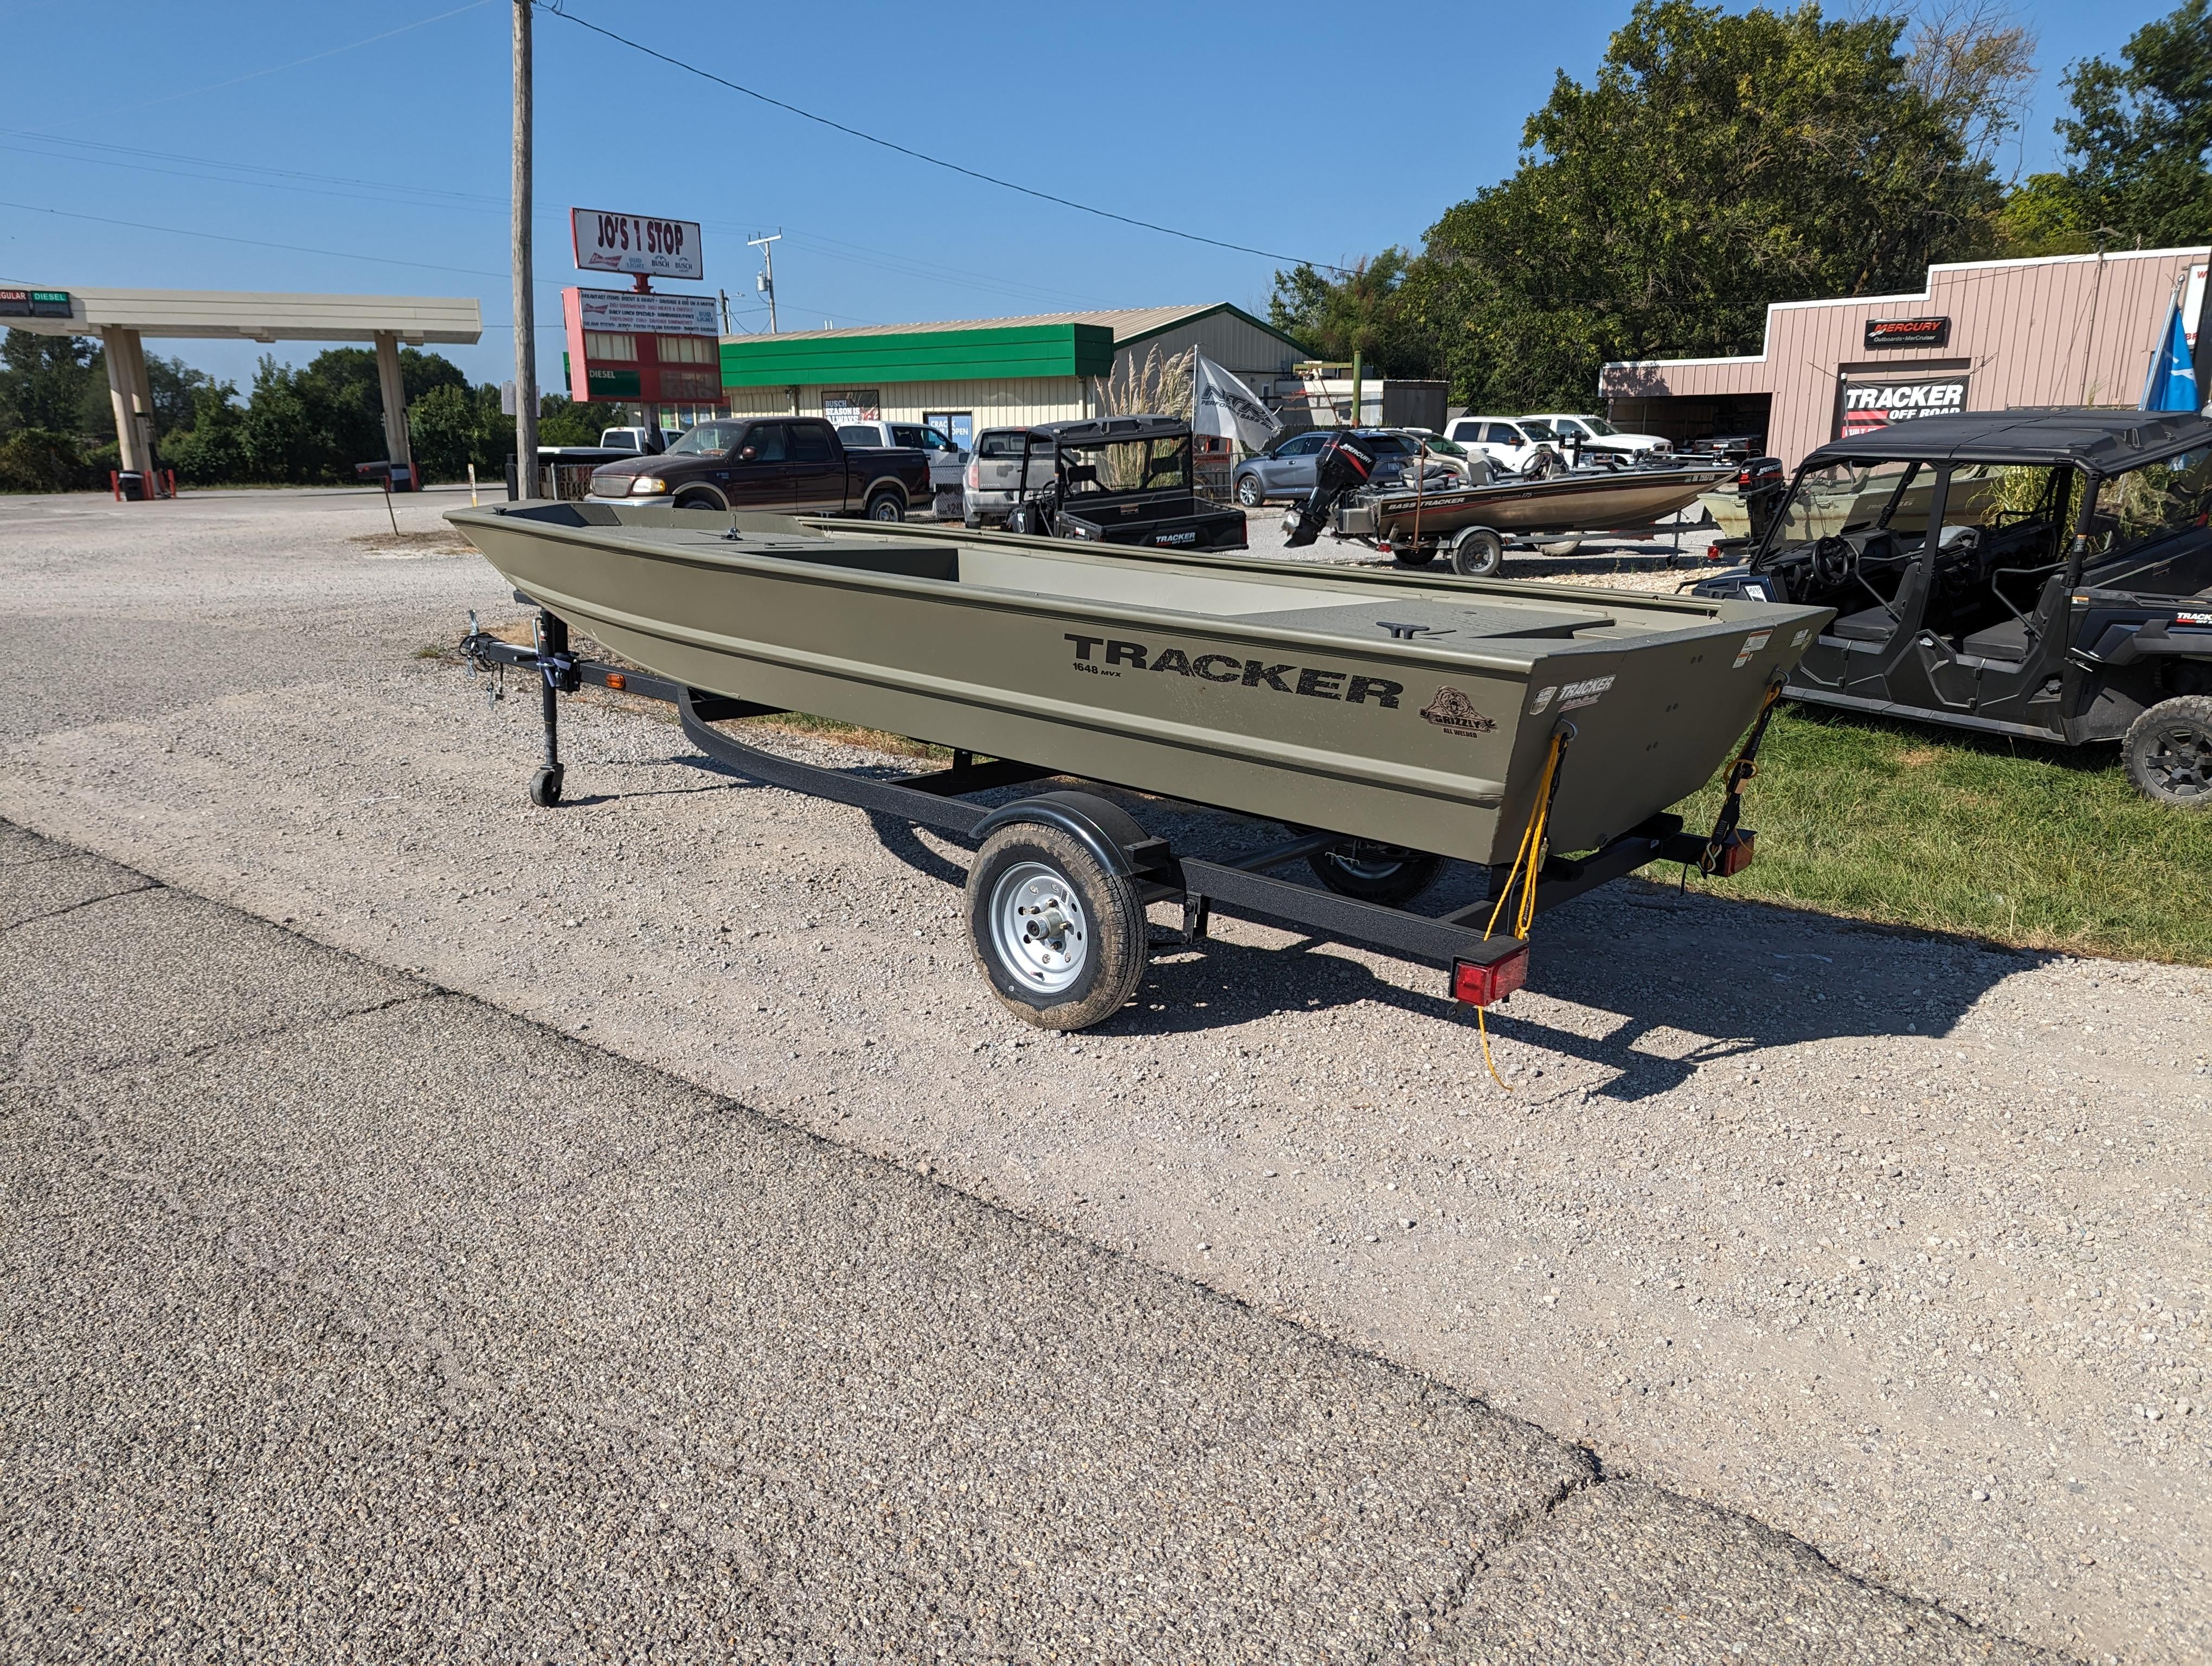 New 2023 Tracker Grizzly 1648 Jon, 08401 - Boat Trader